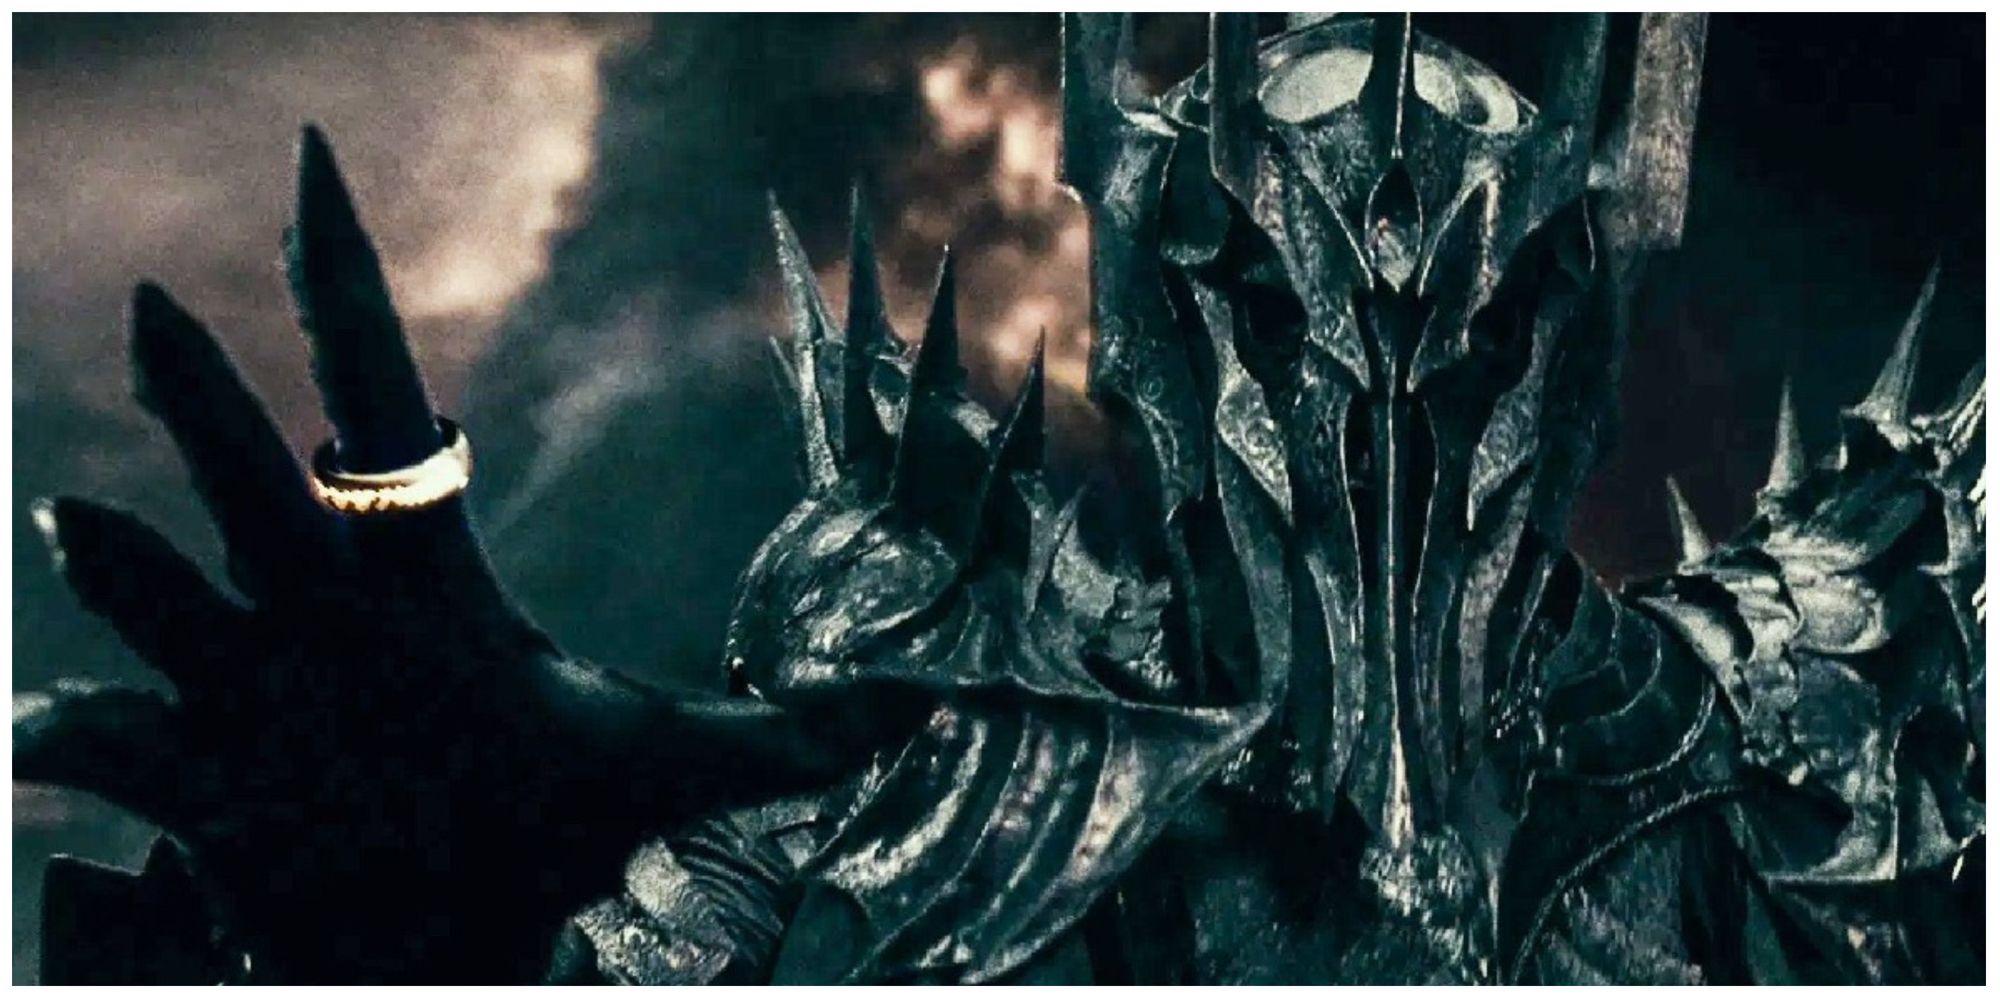 Sauron in the Lord of the Rings